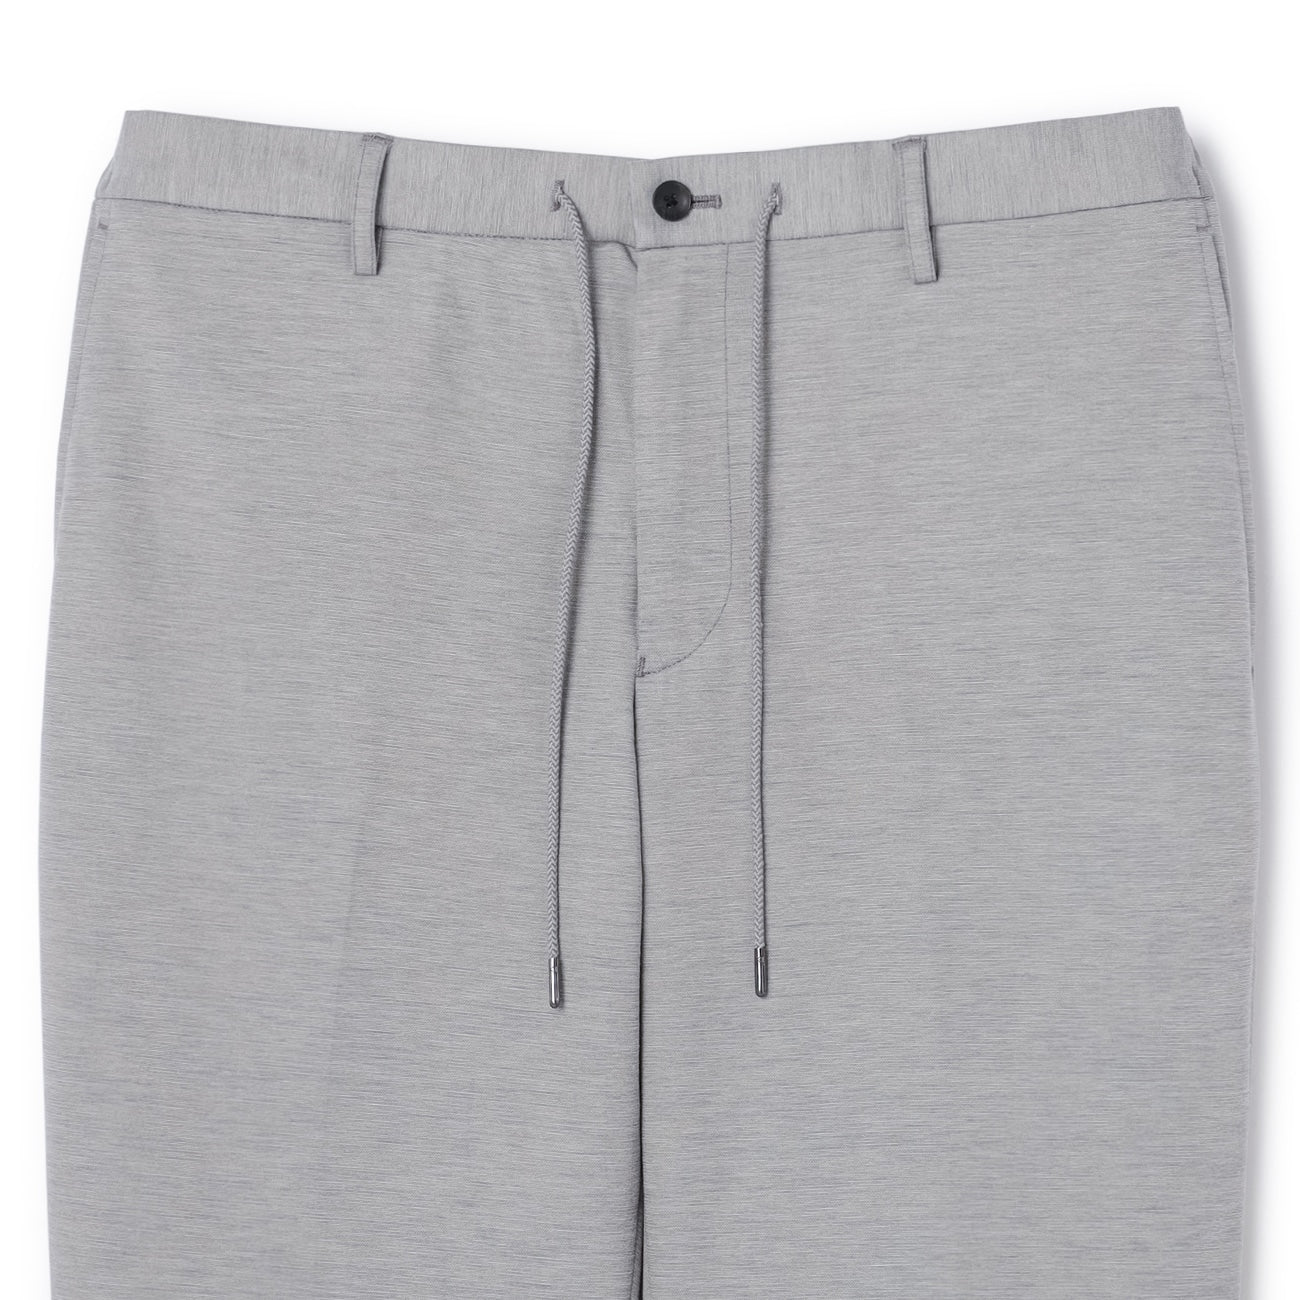 [Pajama Suits] Cool Touch Fabric Jersey Gray Pants